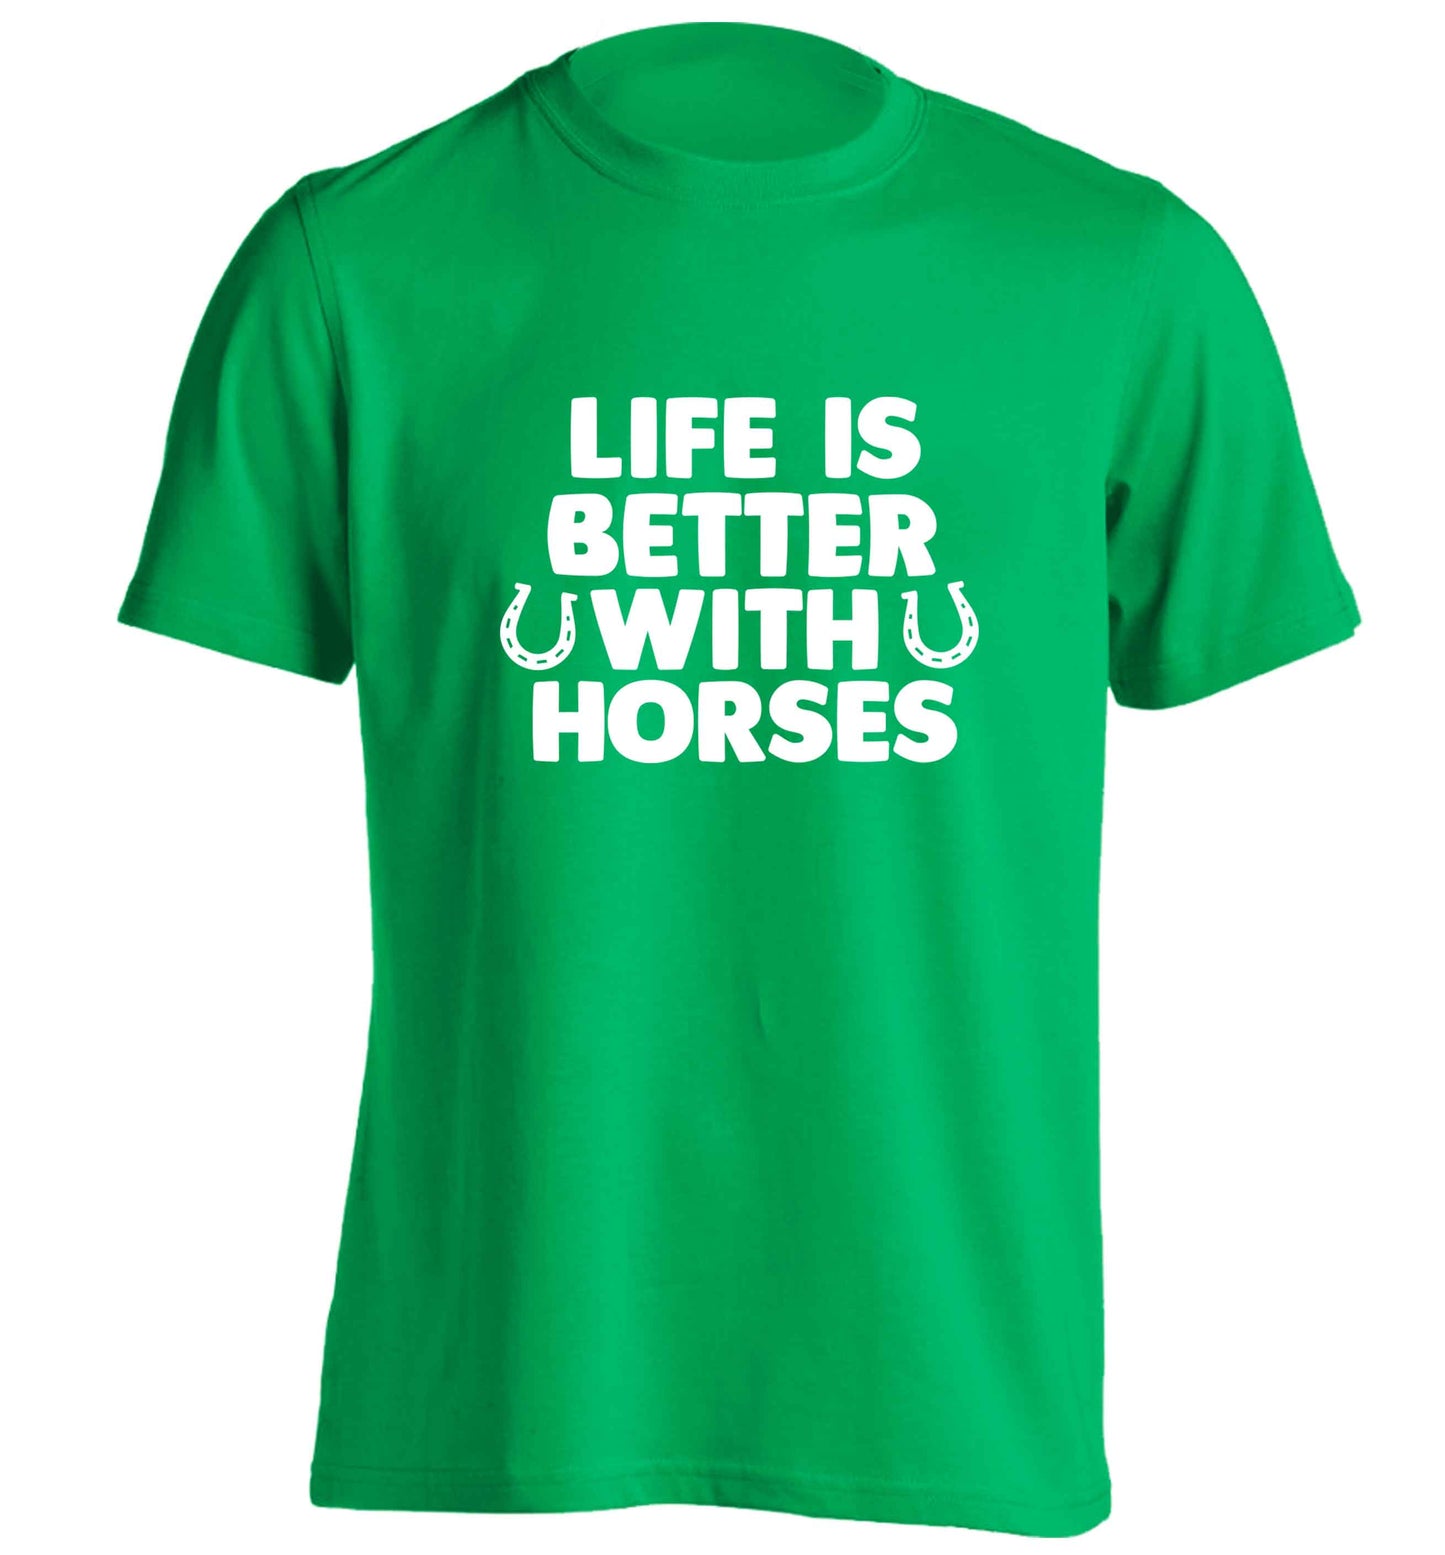 Life is better with horses adults unisex green Tshirt 2XL